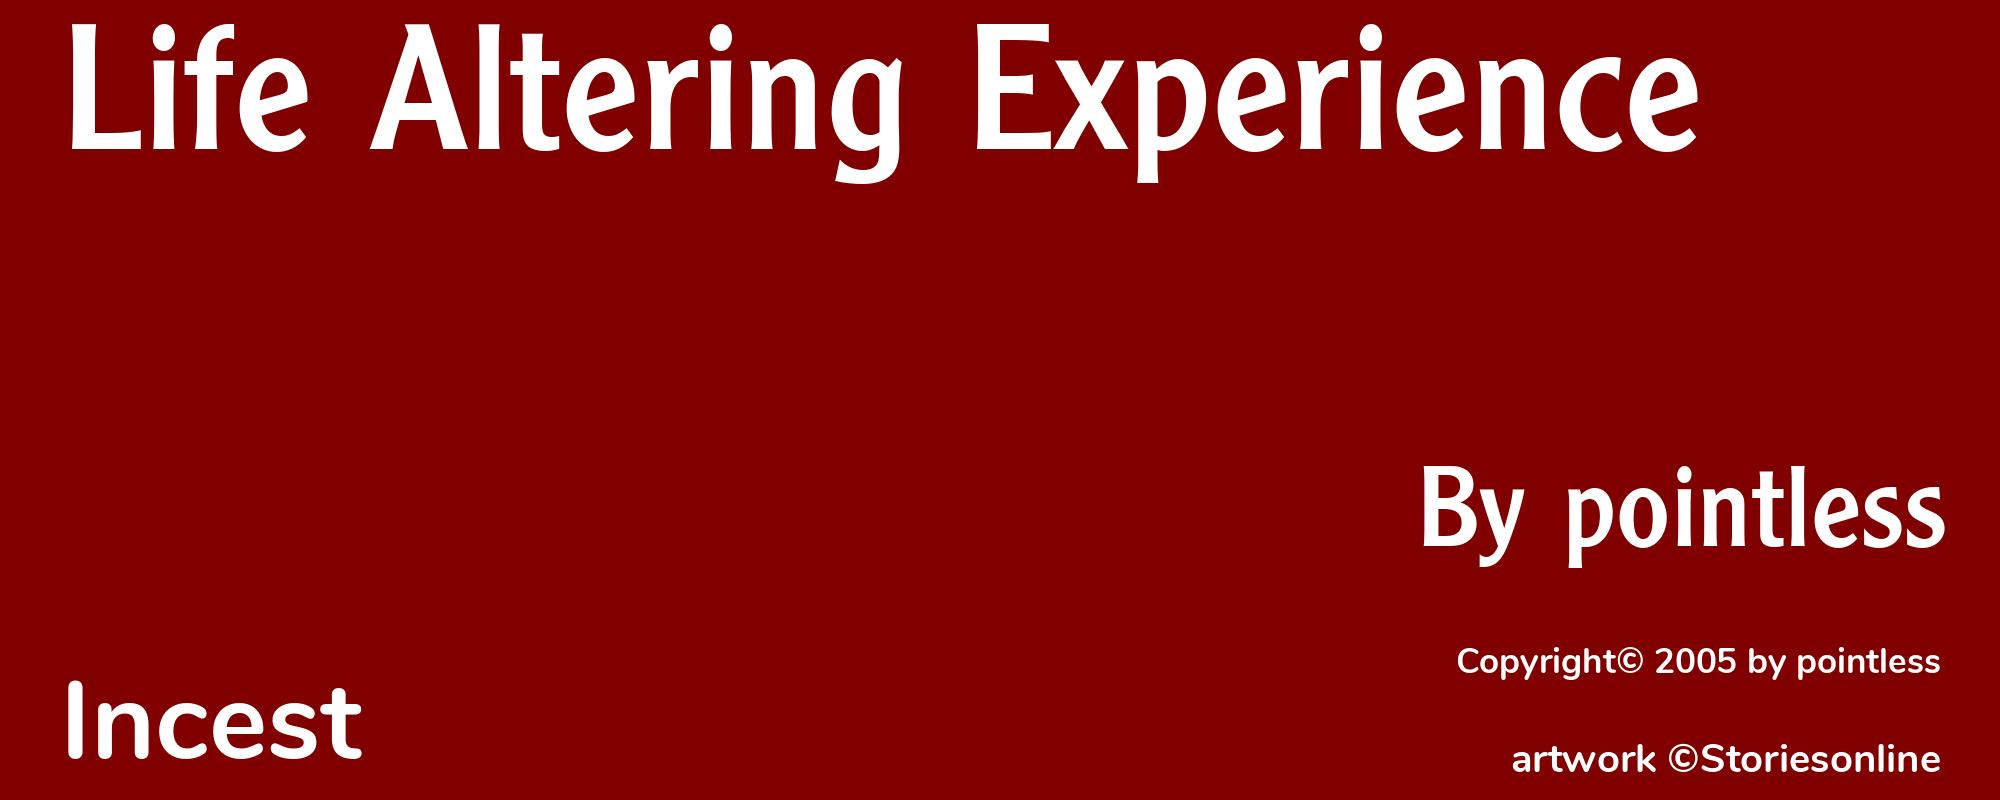 Life Altering Experience - Cover